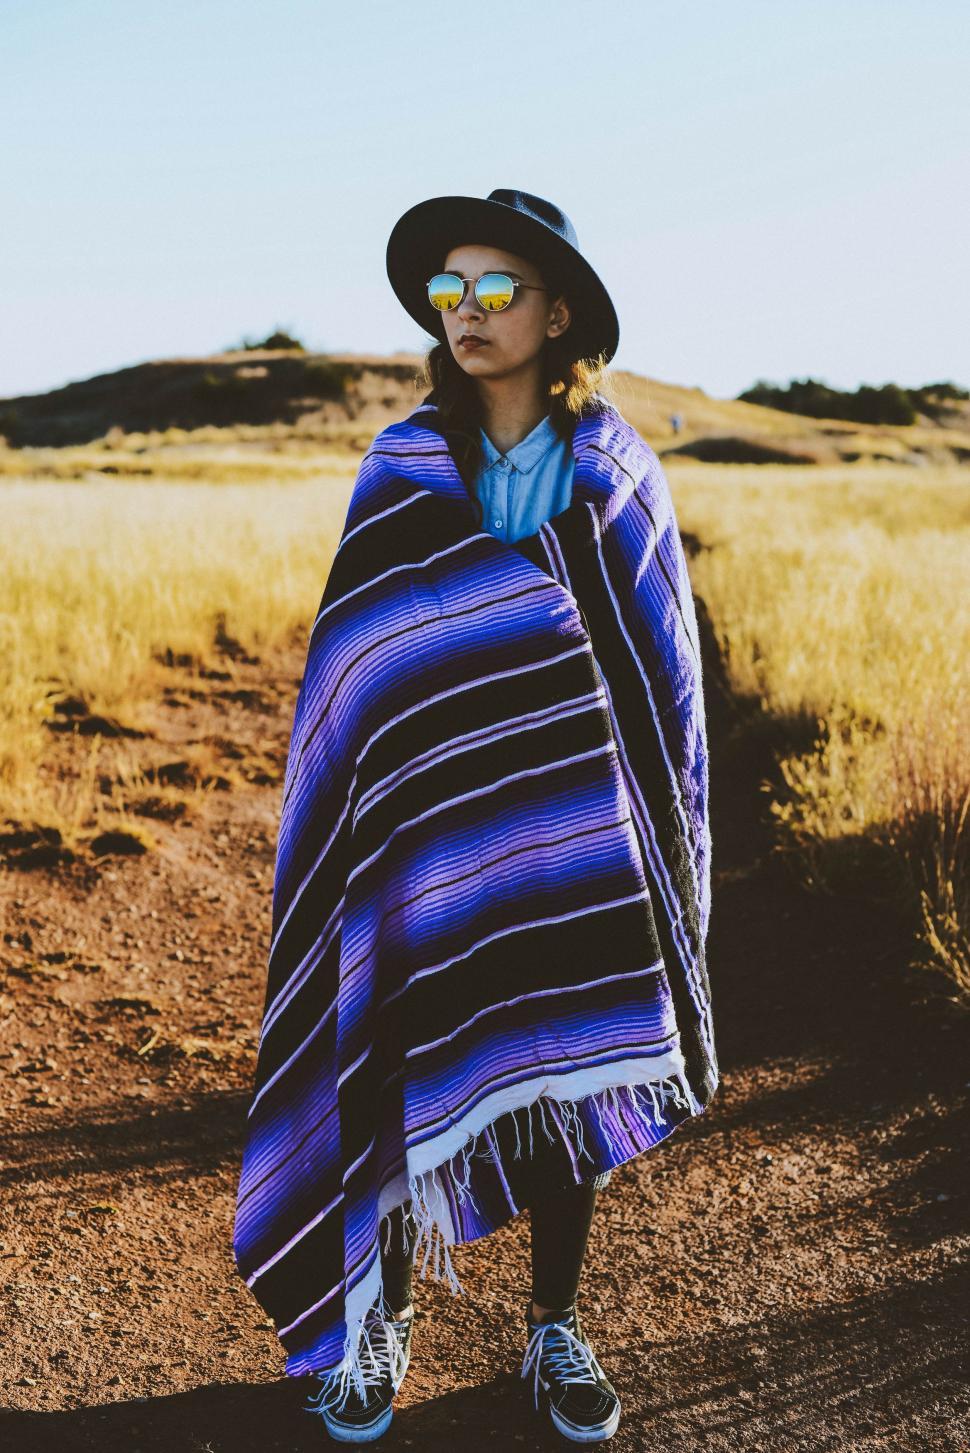 Free Image of Woman Standing in Field Wearing Blue and Black Blanket 